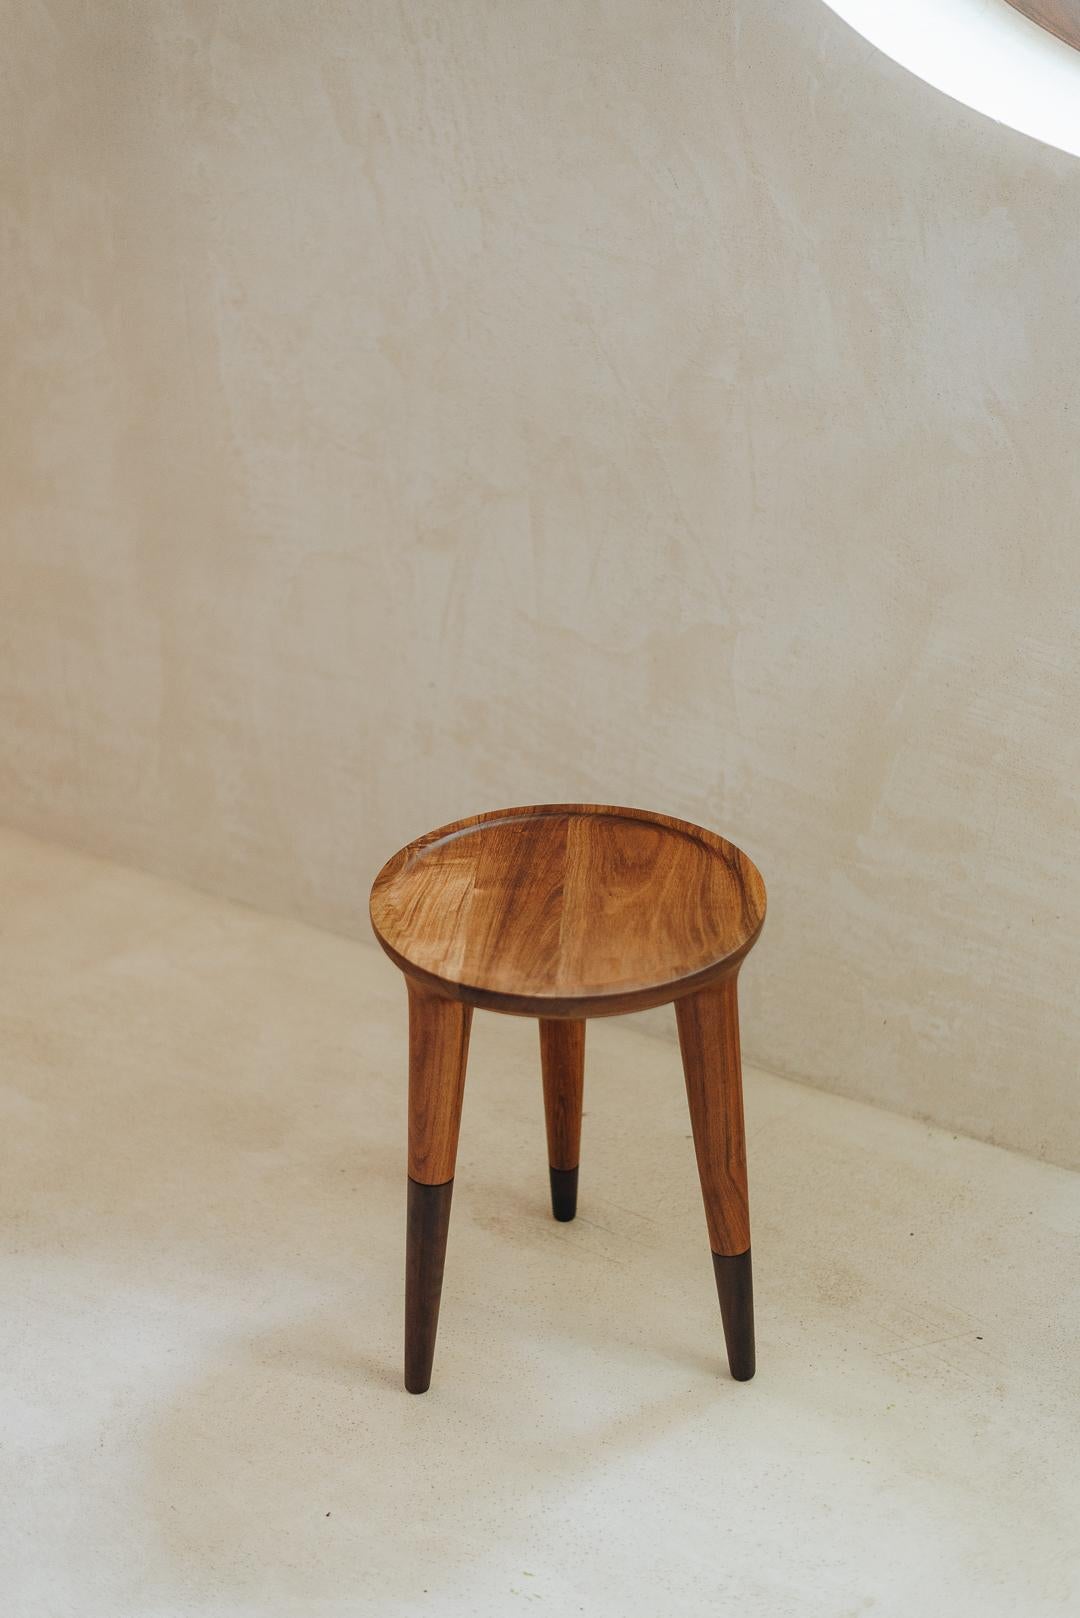 The Chamak is a simple and elegant side table with fine lines that emphasize the natural beauty of the perfectly turned tropical wood. Excellent production techniques and attention to detail ensure that the Chamak is an outstanding piece. It is